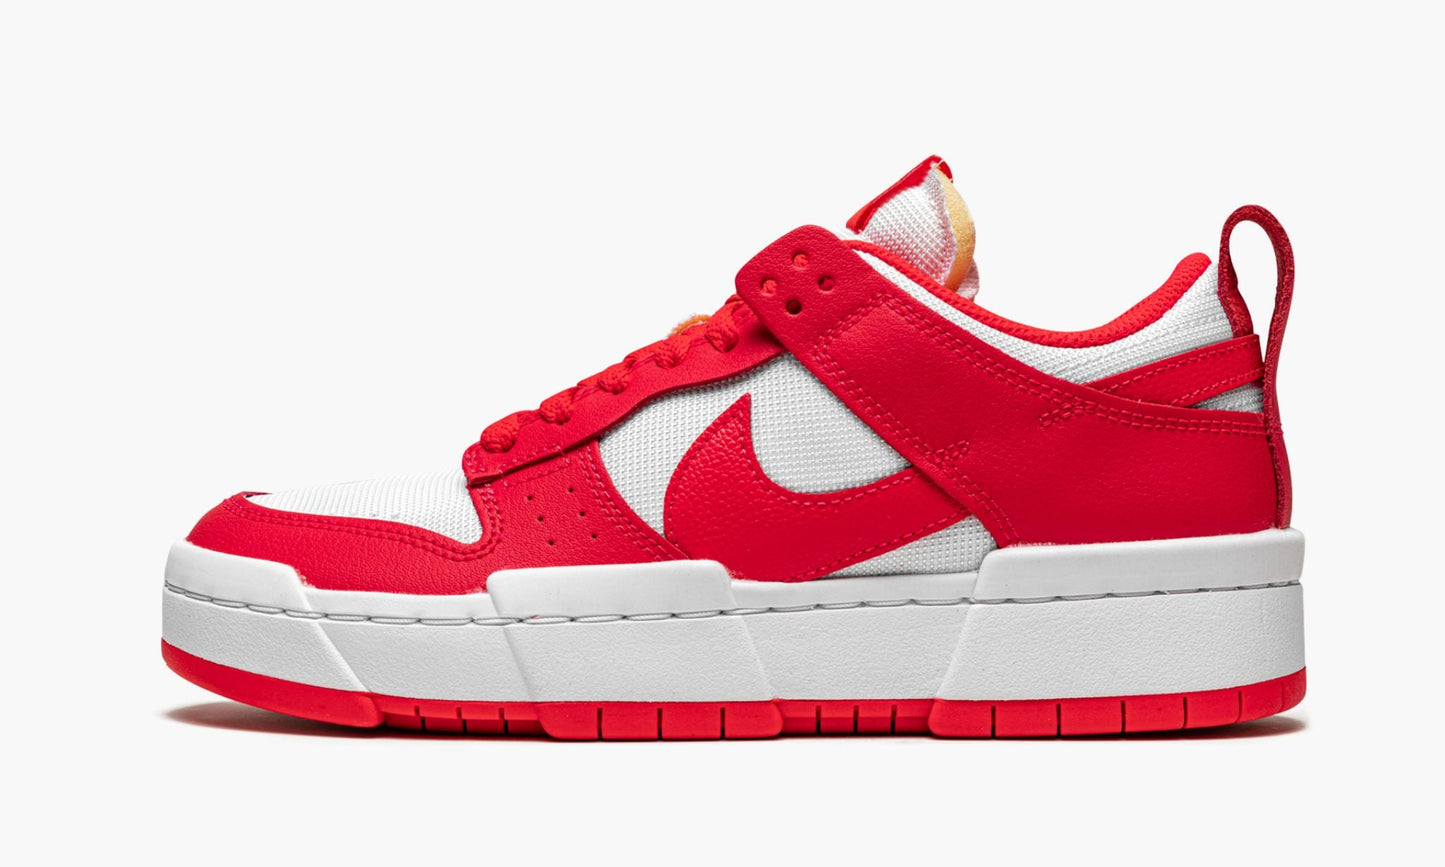 Dunk Low Disrupt "Siren Red"